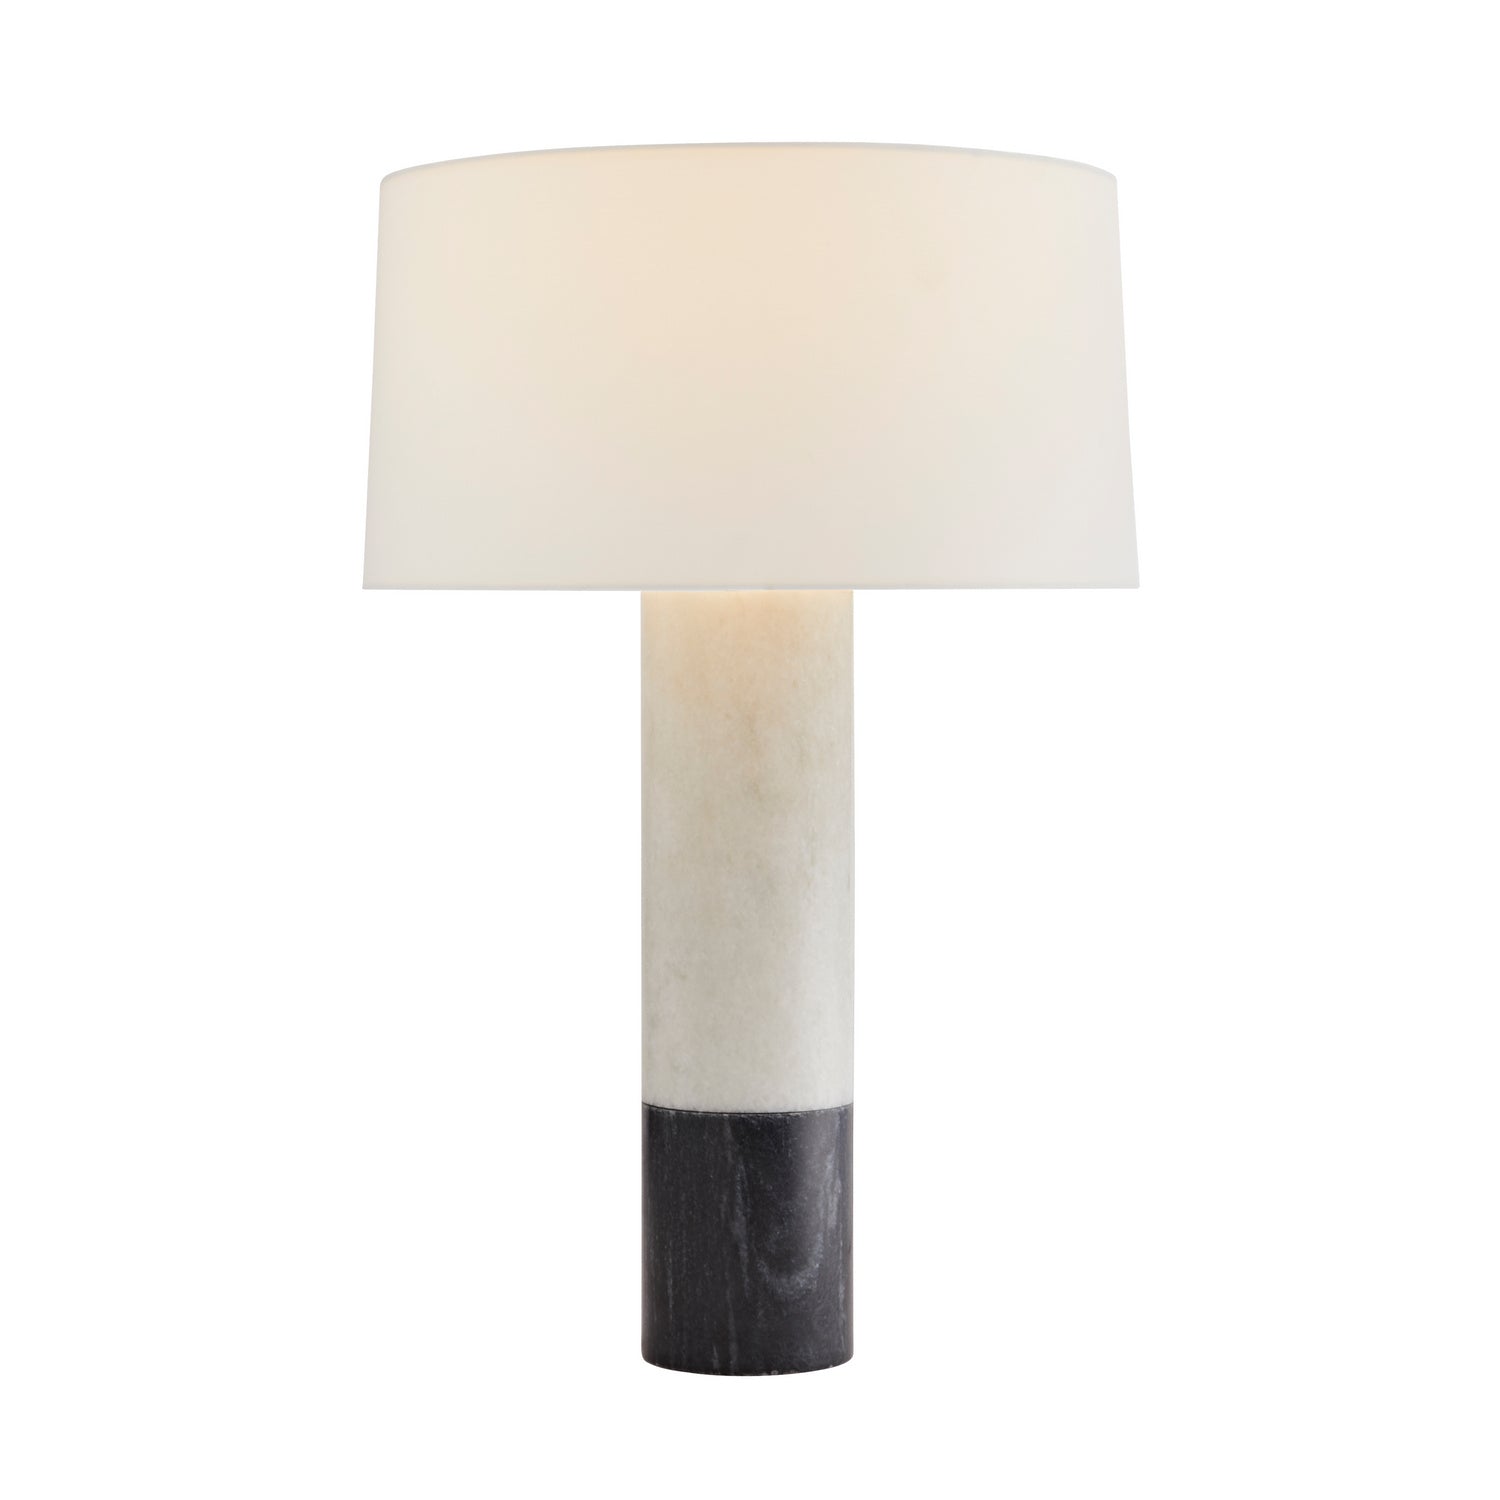 One Light Lamp from the Ike collection in White finish